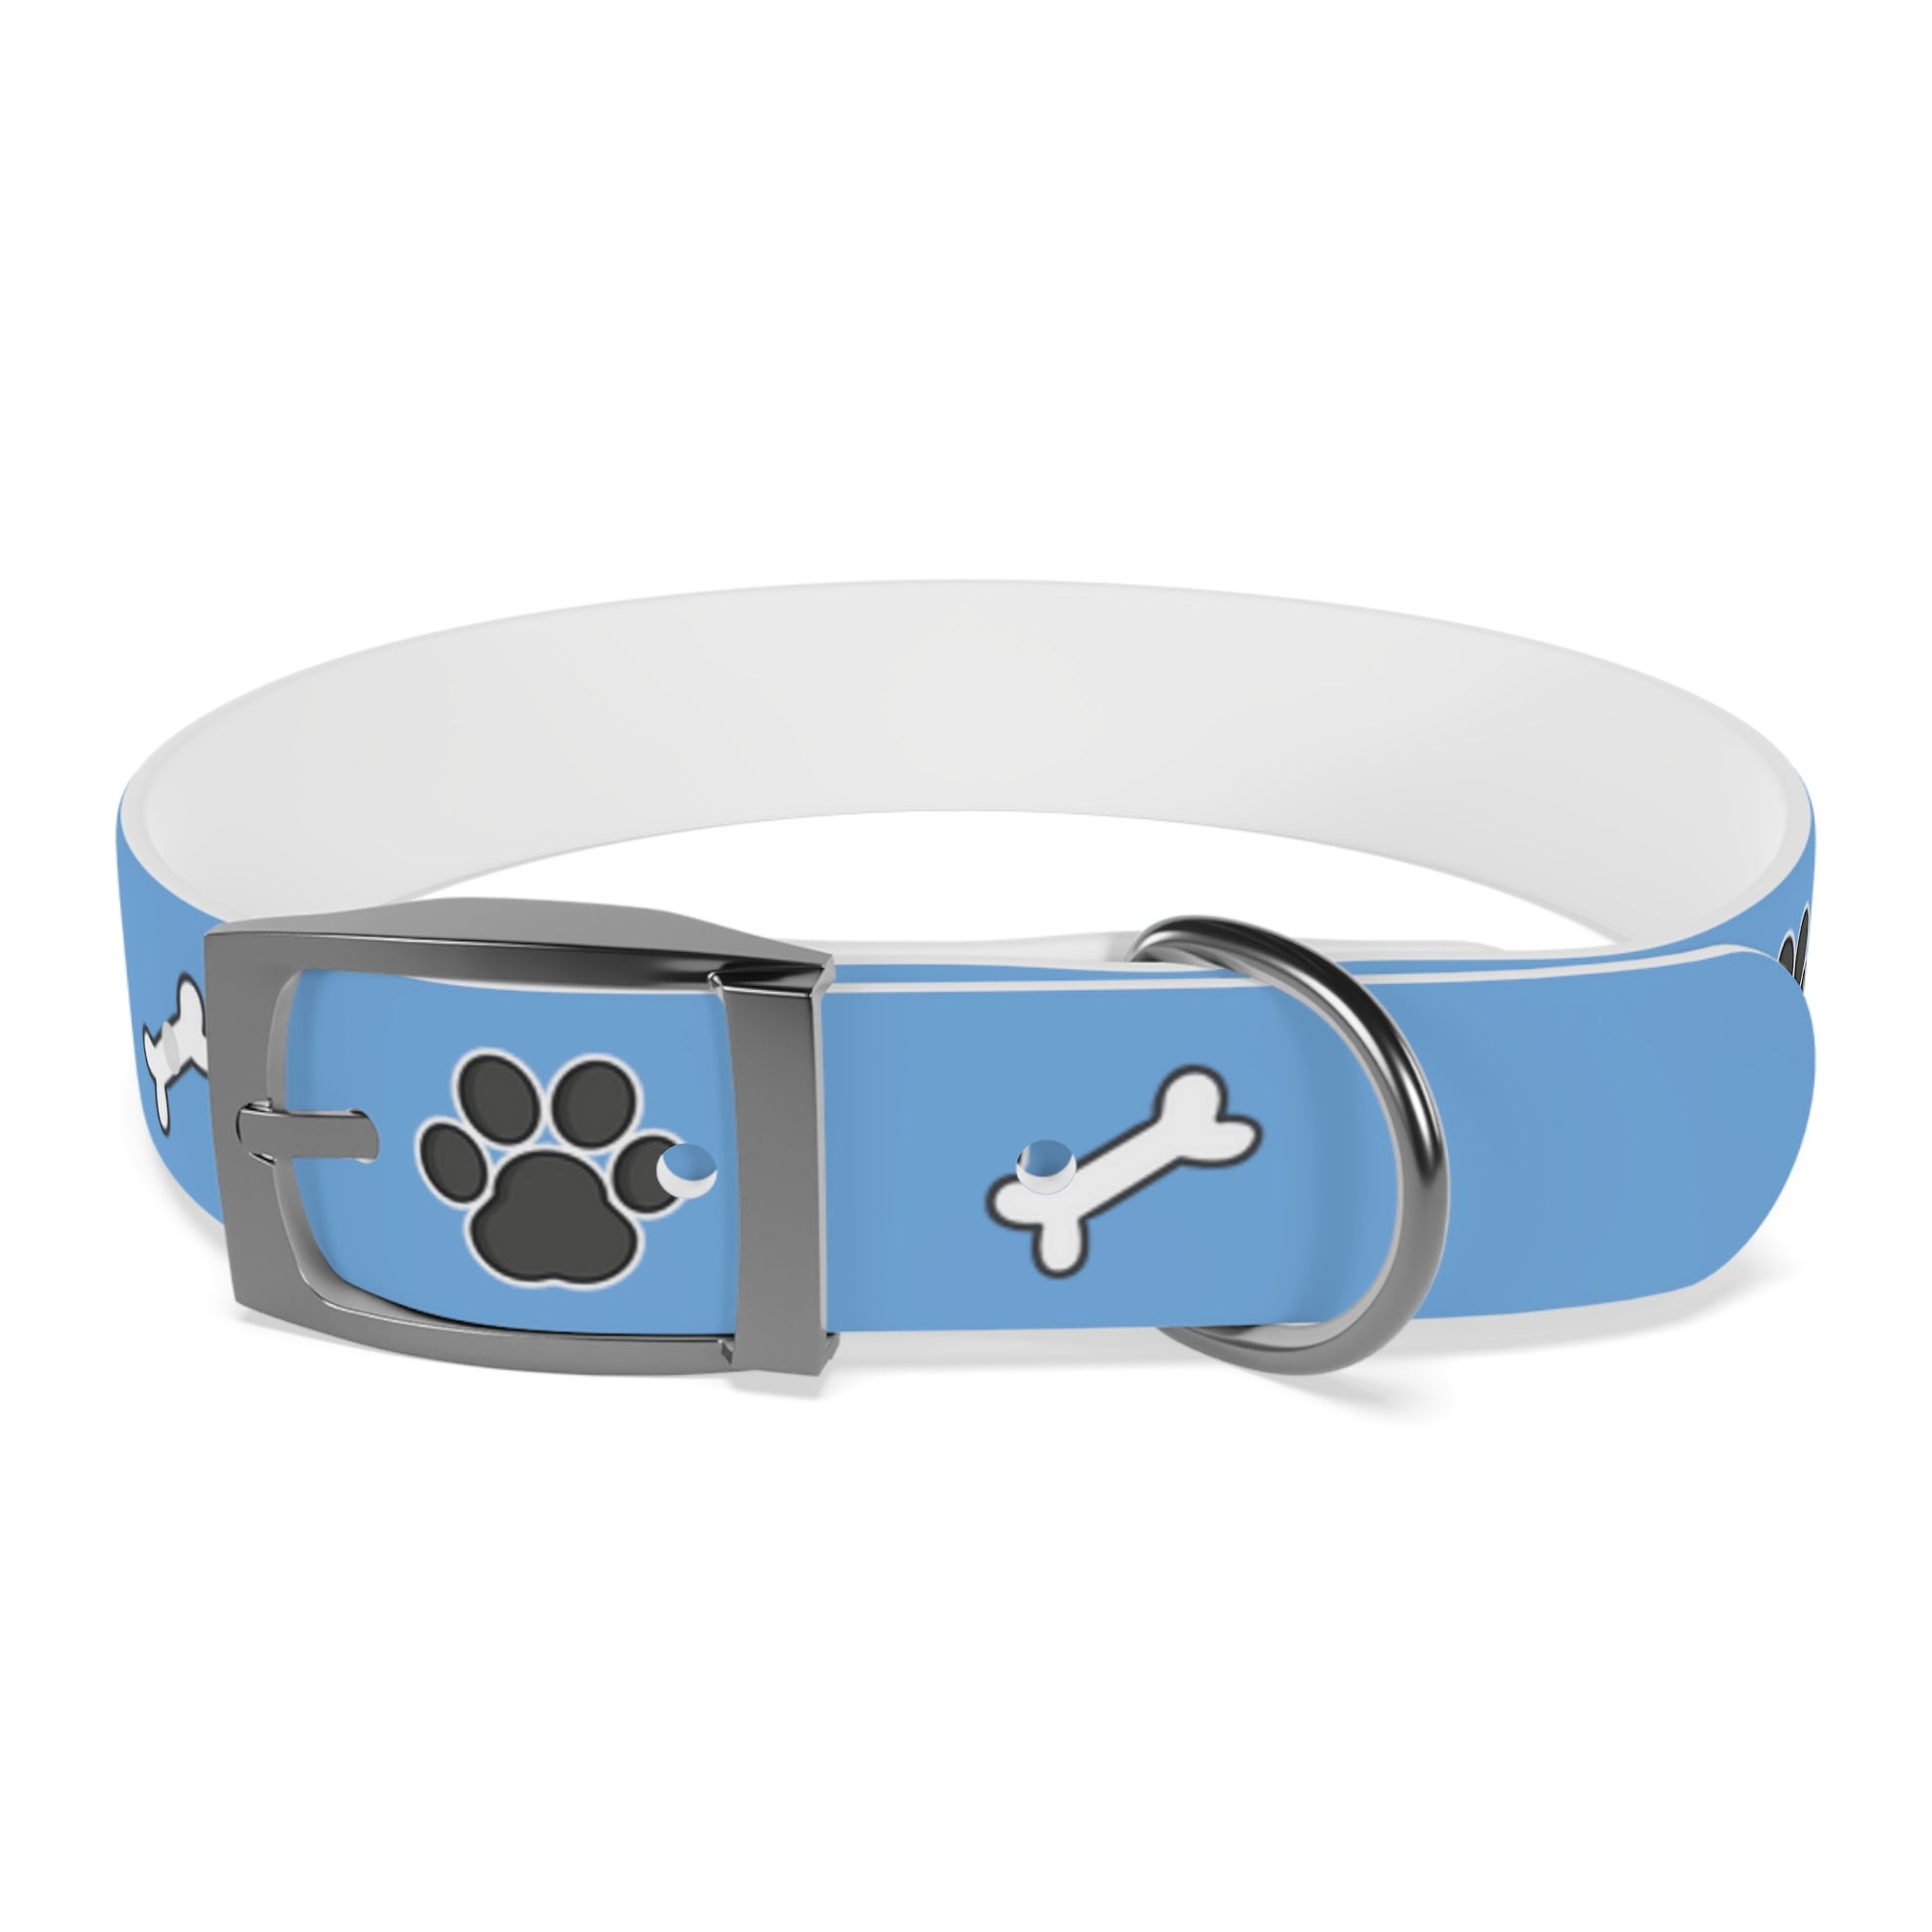 front of a dog collar with dog bones and paws design. The name of the dog is in the middle of the pet collar.  The dog collar color is blue